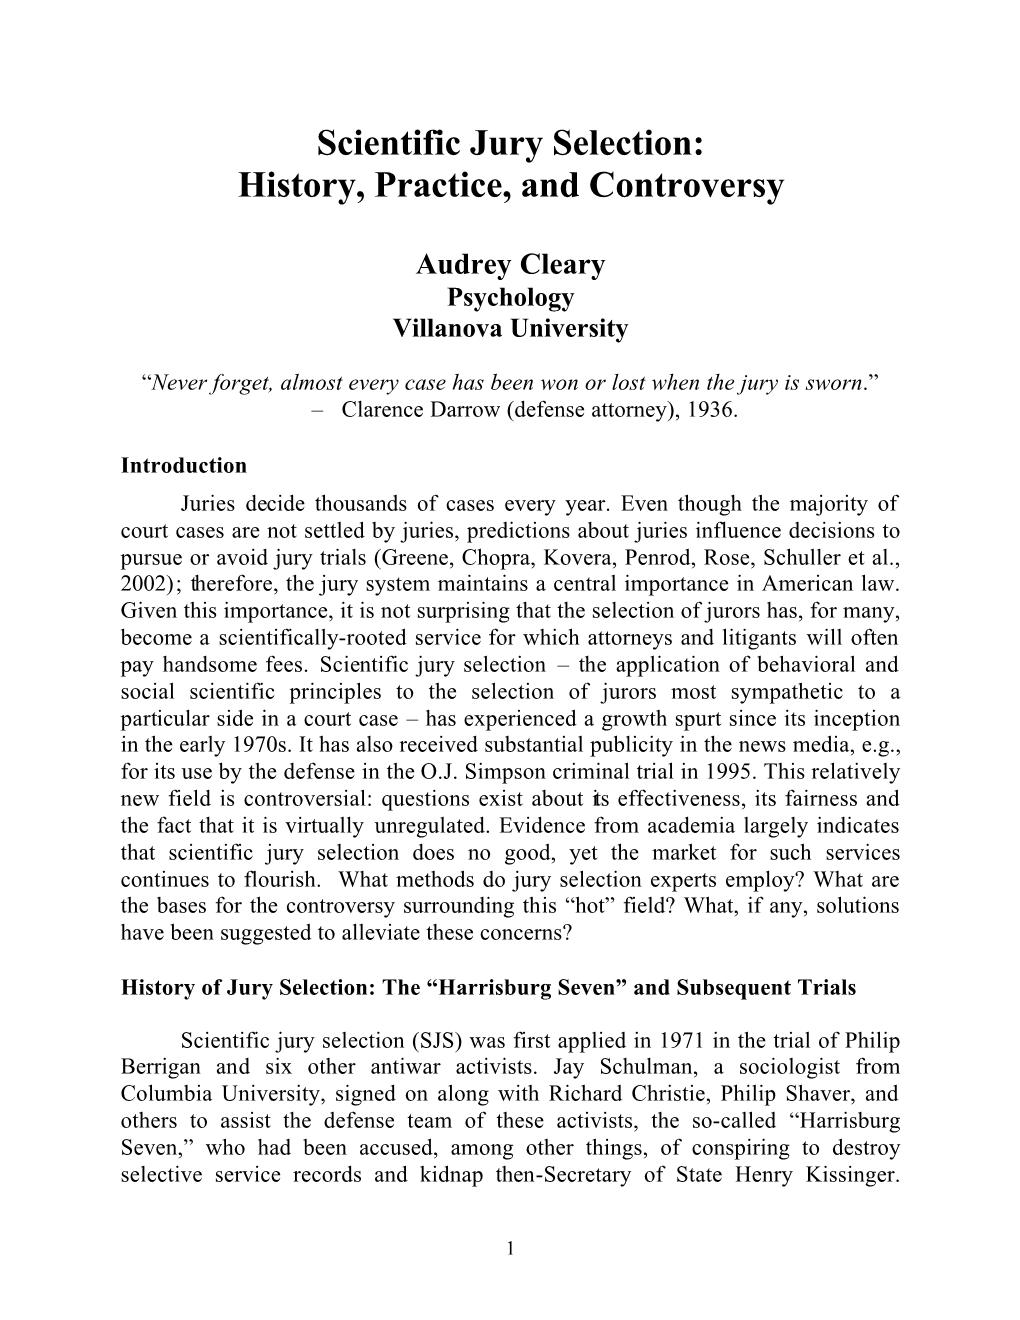 Scientific Jury Selection: History, Practice, and Controversy